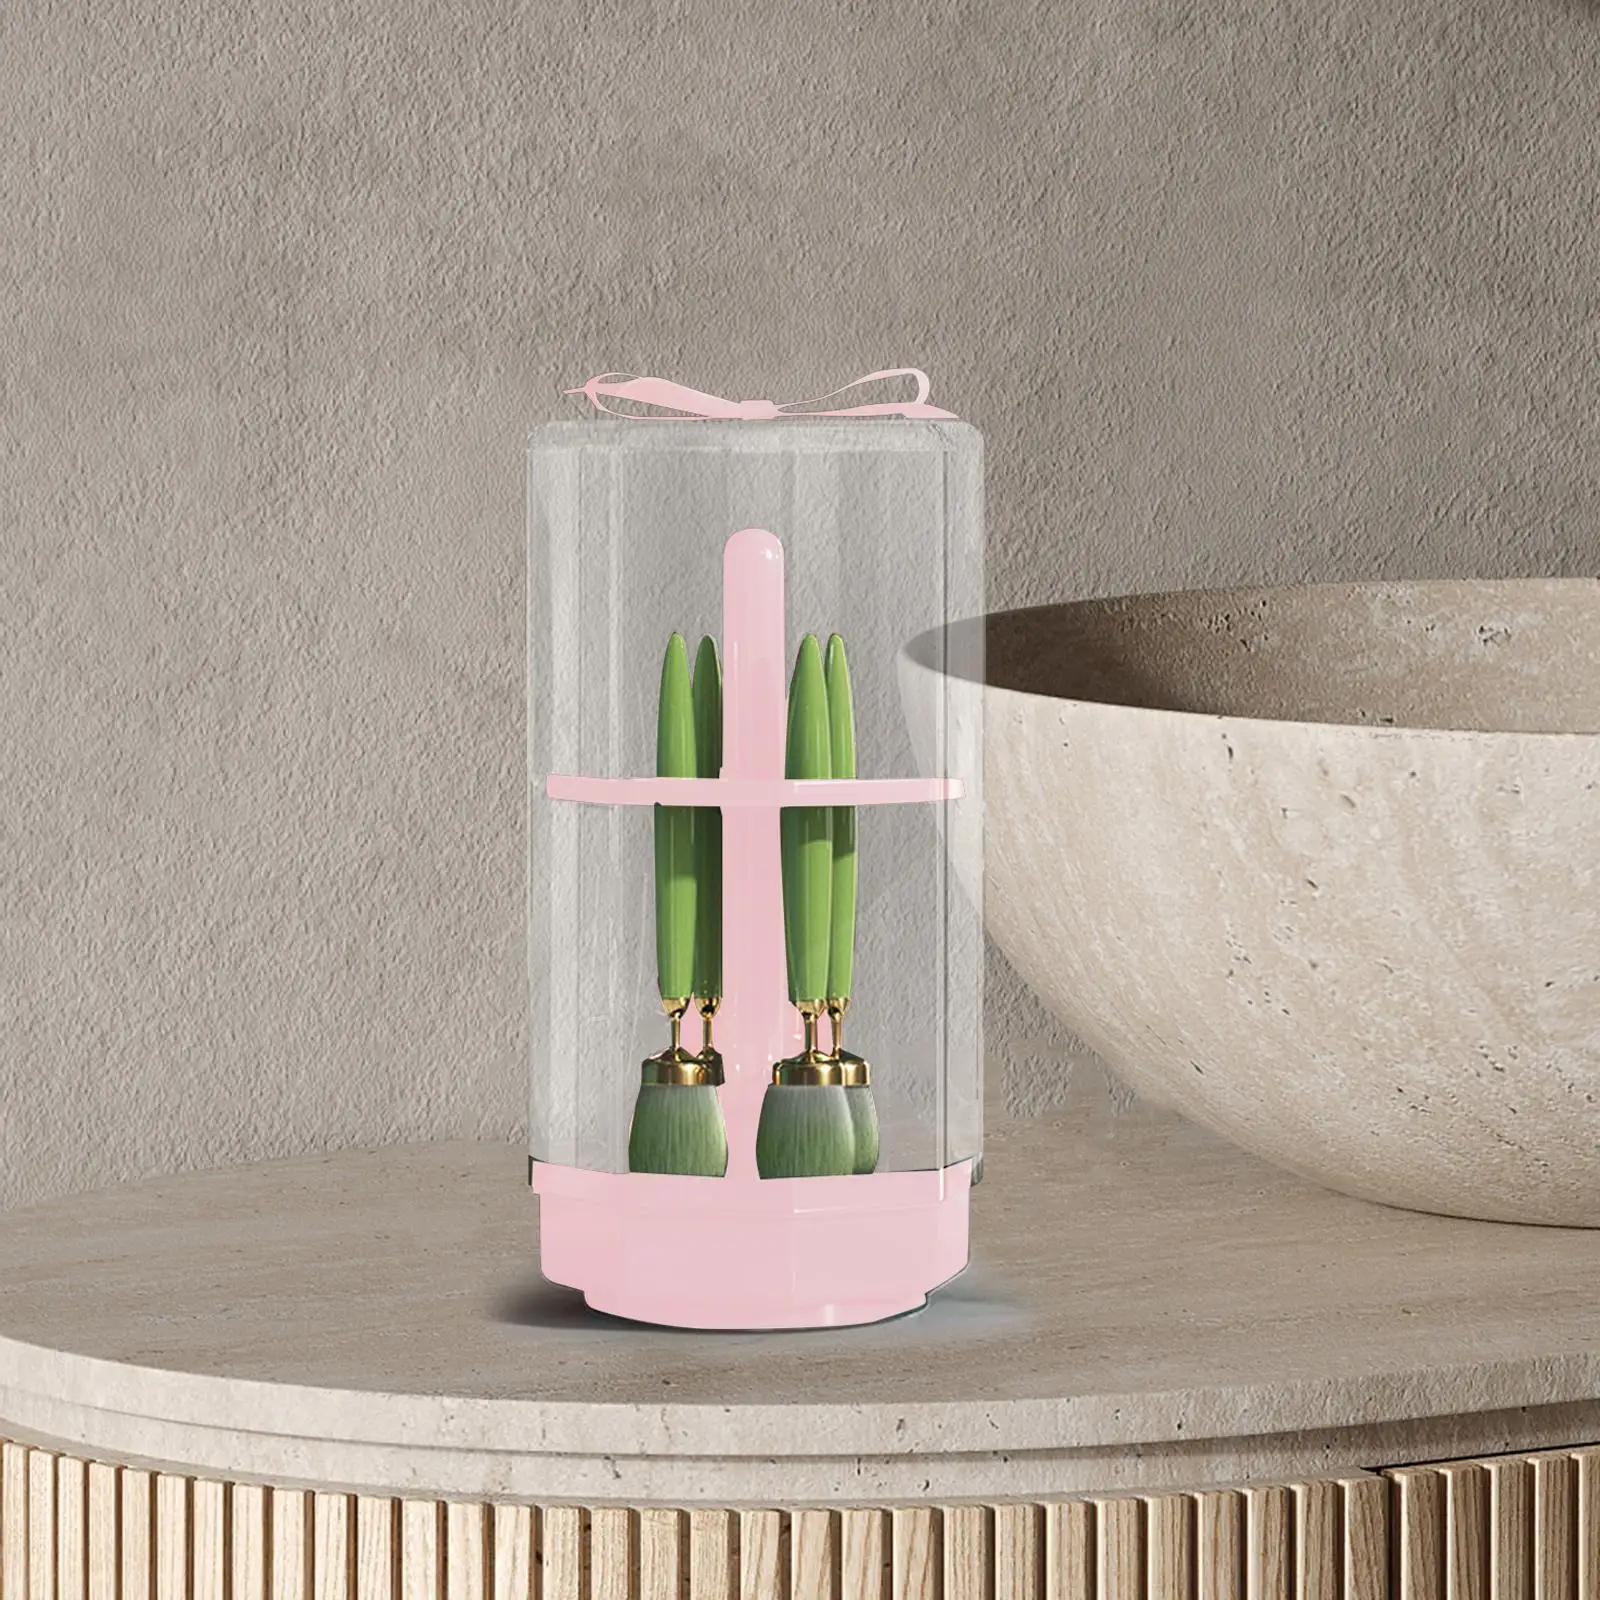 Waterproof Makeup Brush Drying Rack Transparent with Cover Makeup Supplies Nonslip Storage Container for Countertop Dresser